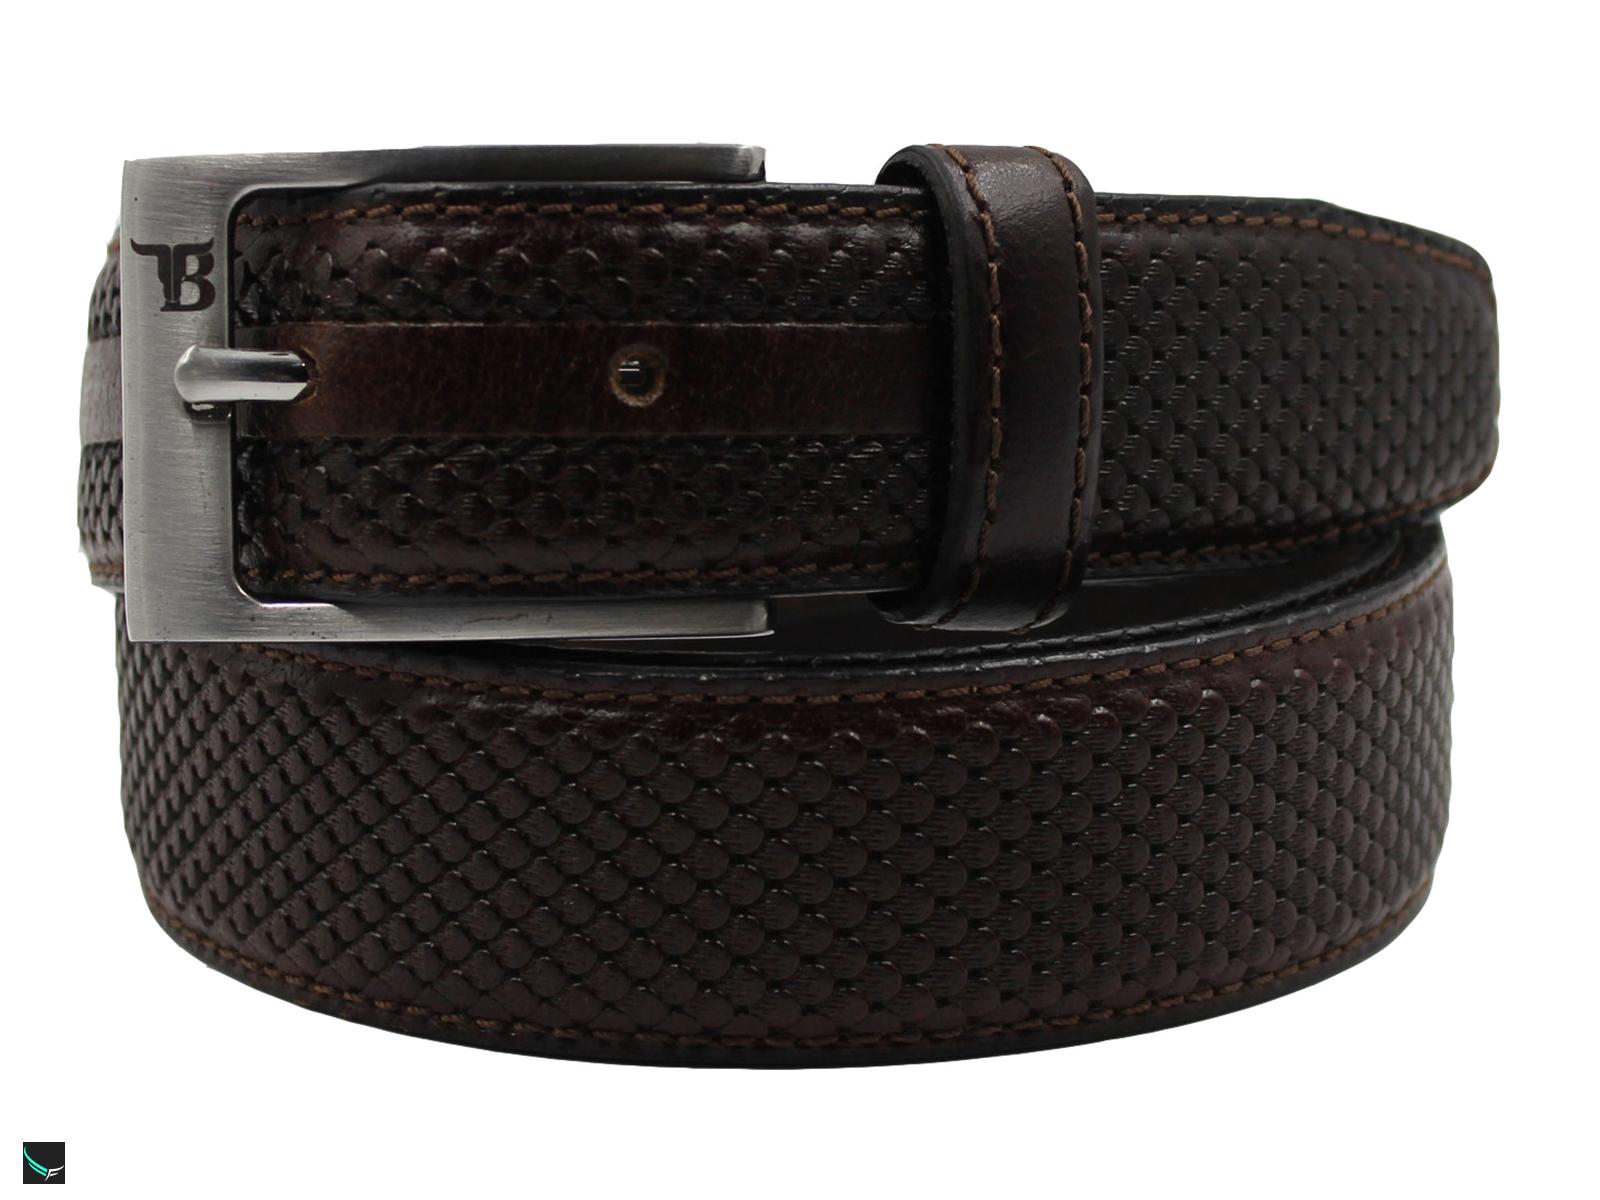 Fish Printed Leather Belt In Brown - 4200 - Leather Collections On ...